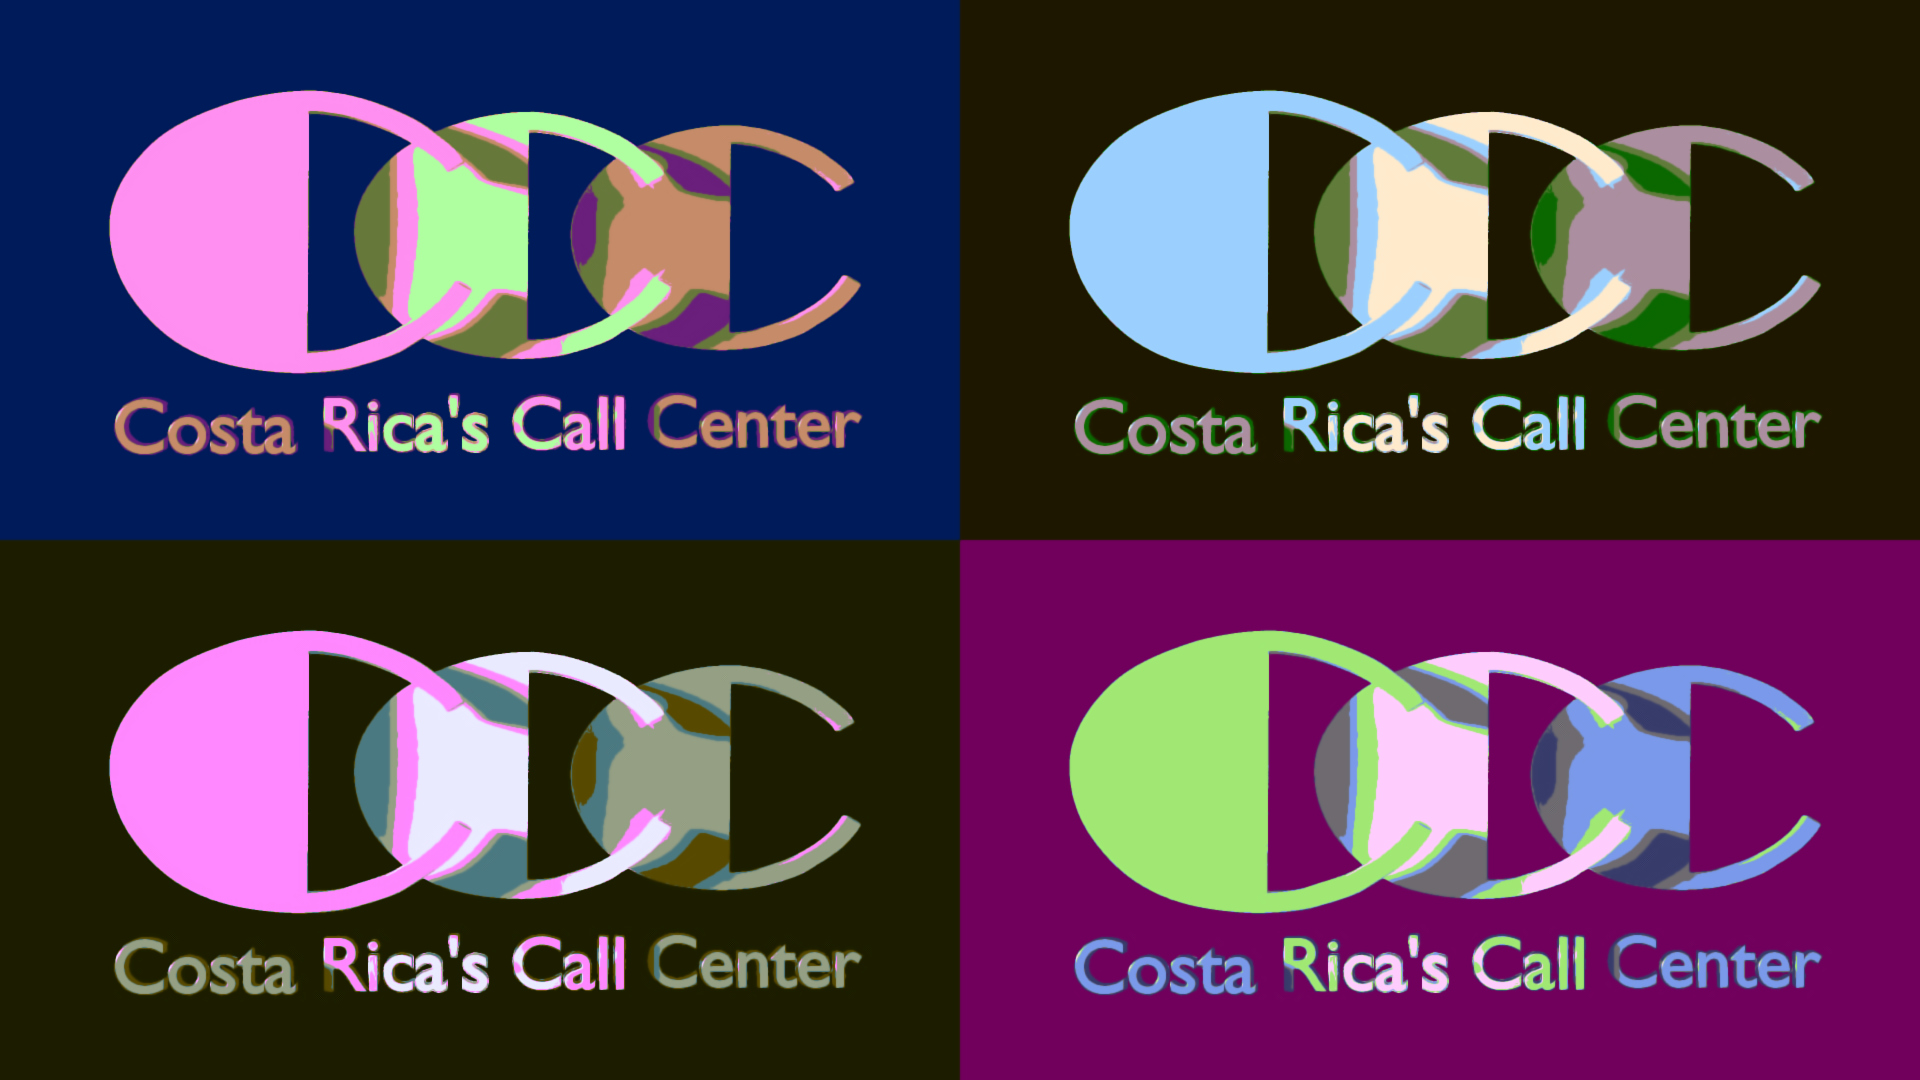 COLD CALL DIALER SYSTEM.jpg  by richardblank